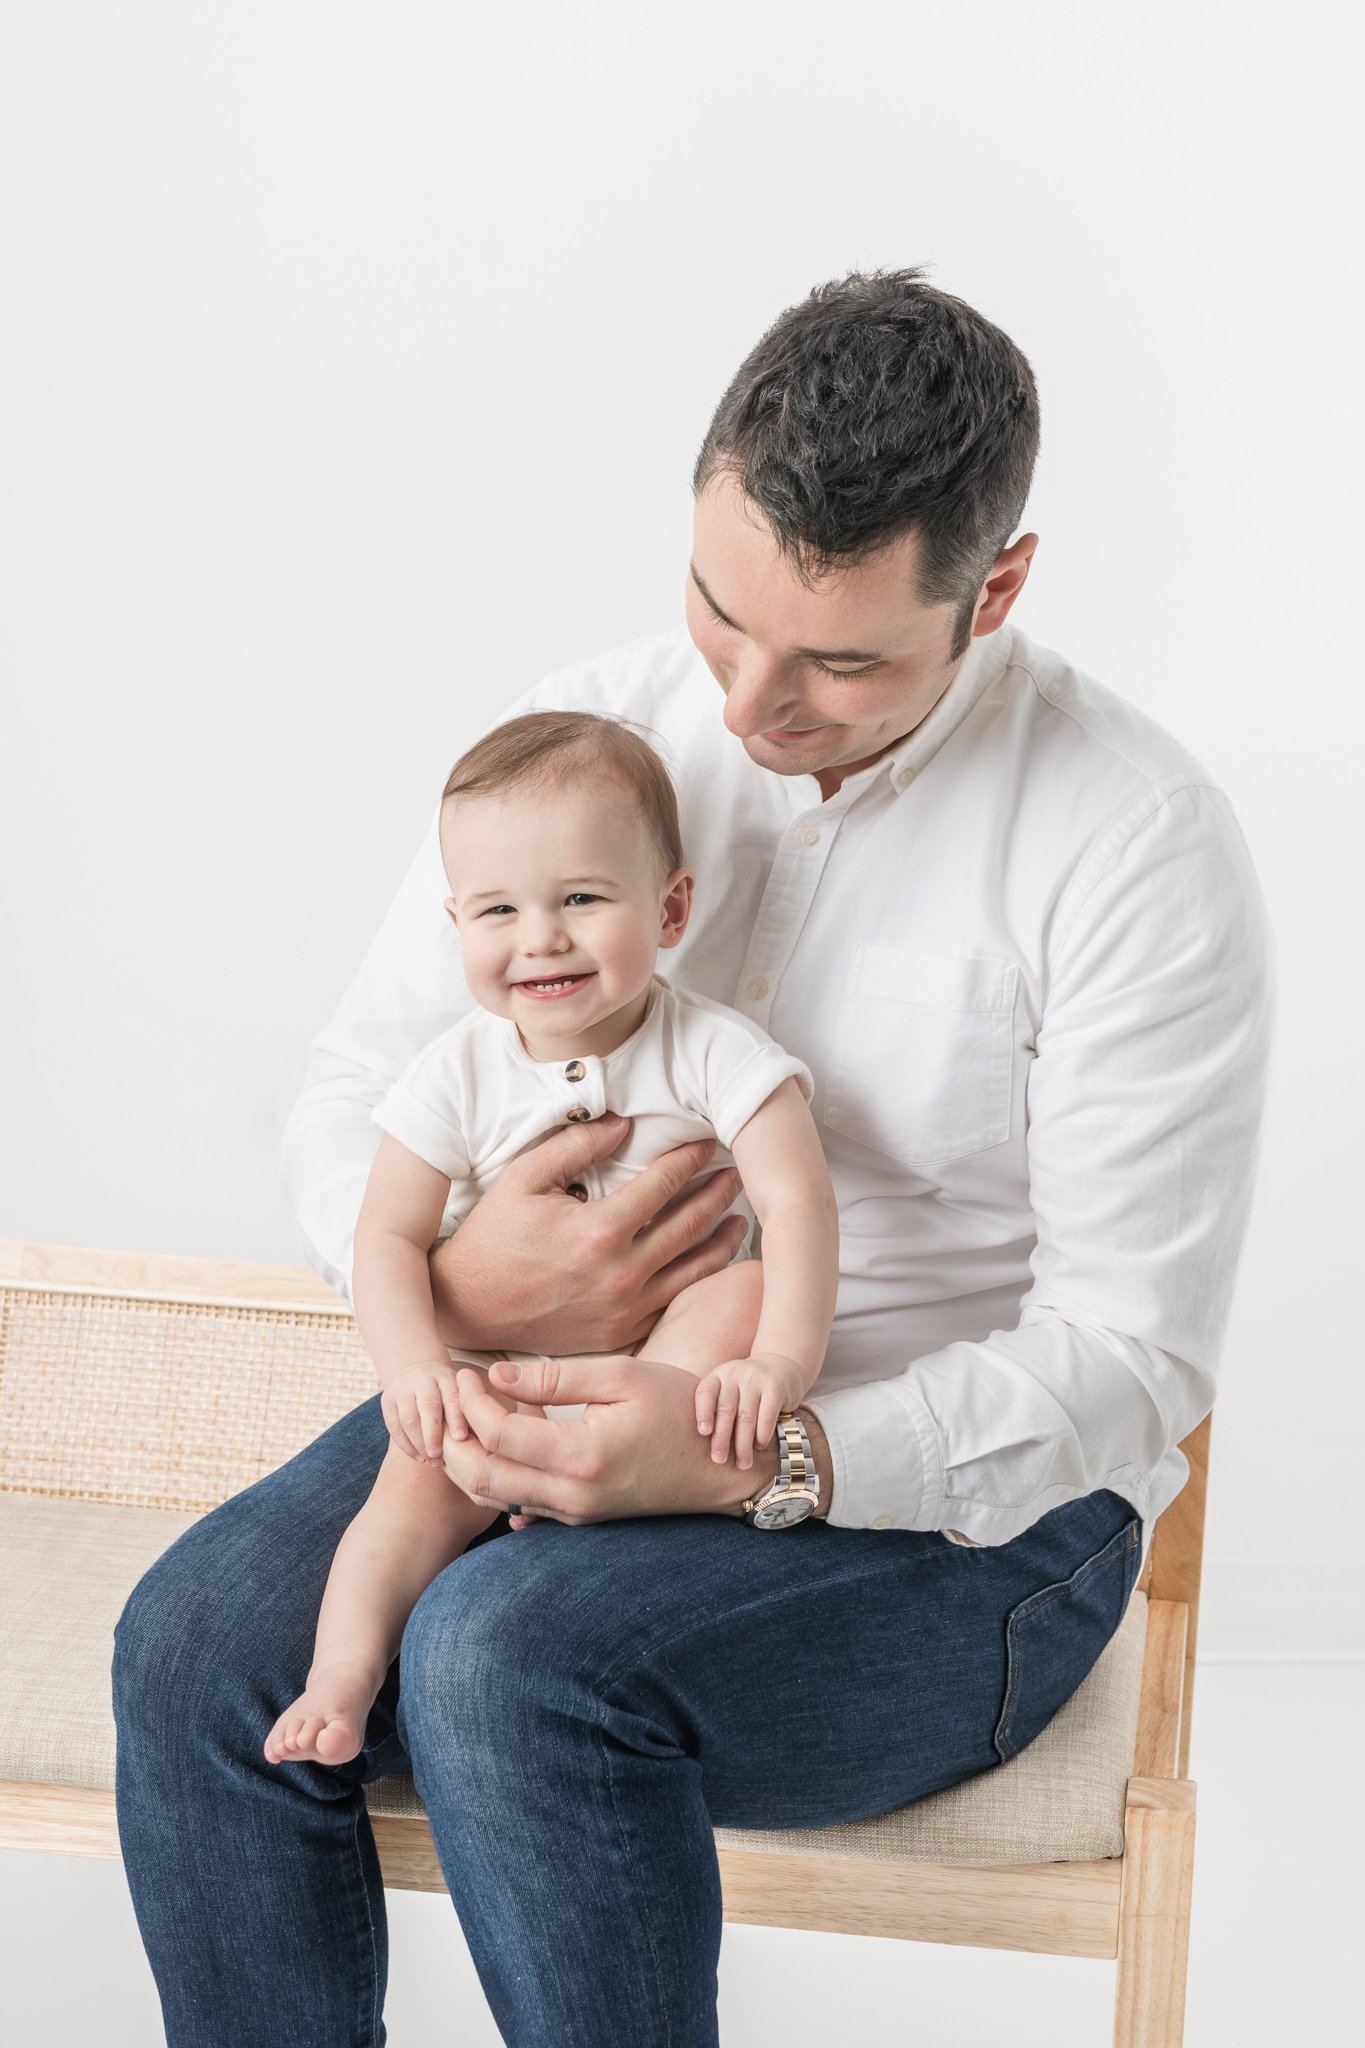  Toddler boy laughs while sitting with his daddy at a Studio in New Jersey by Nicole Hawkins Photography. father with baby studio modern family portraits #NicoleHawkinsPhotography #NicoleHawkinsBabies #FirstBirthdayPhotography #StudioFamilyPortraits 